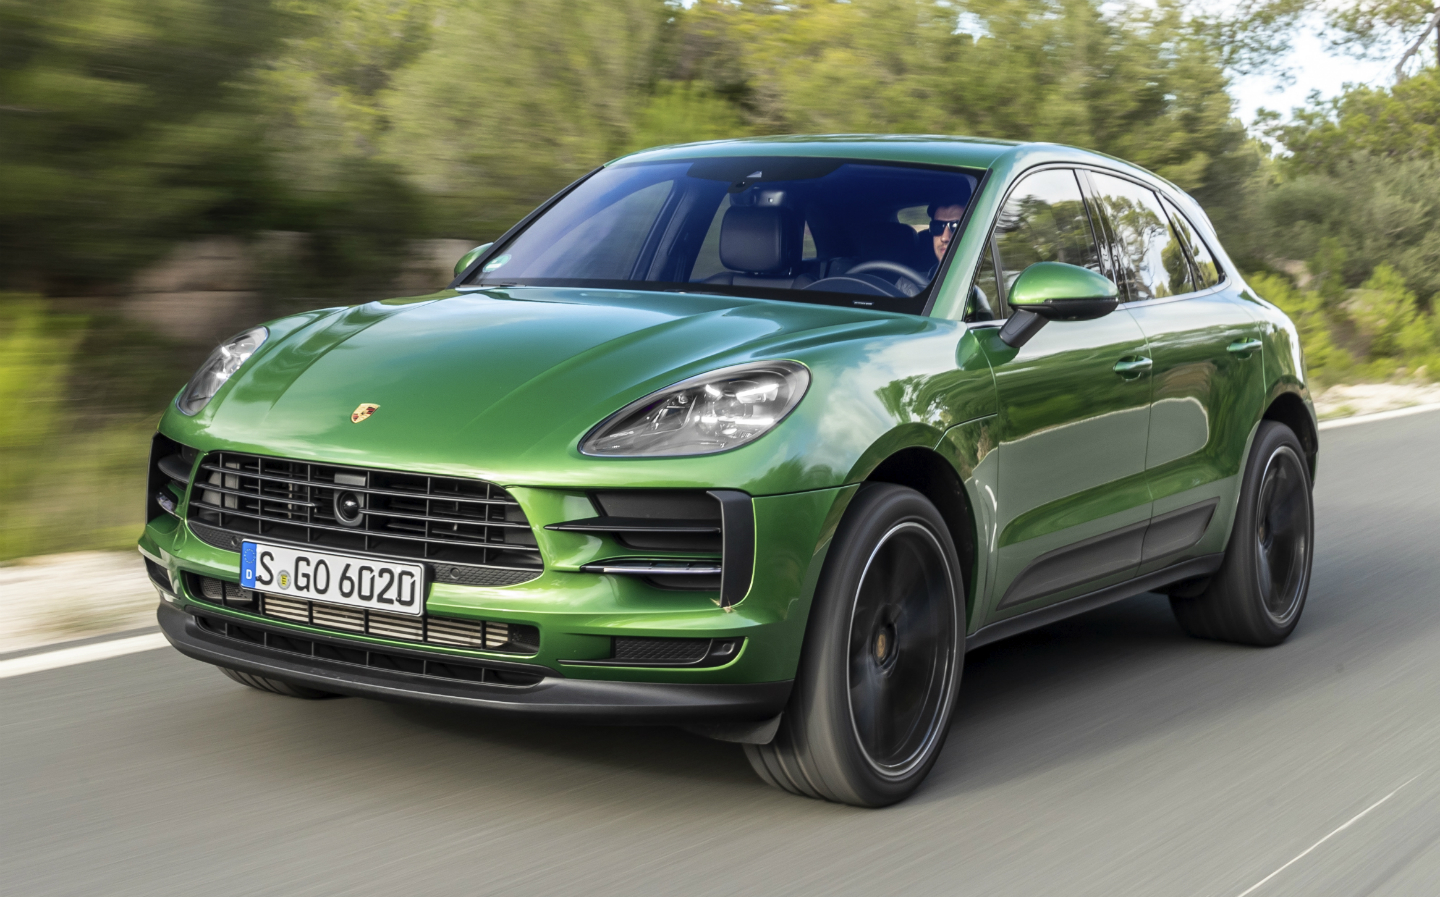 Jeremy Clarkson: bright green paint isn't enough to make me want a Porsche Macan